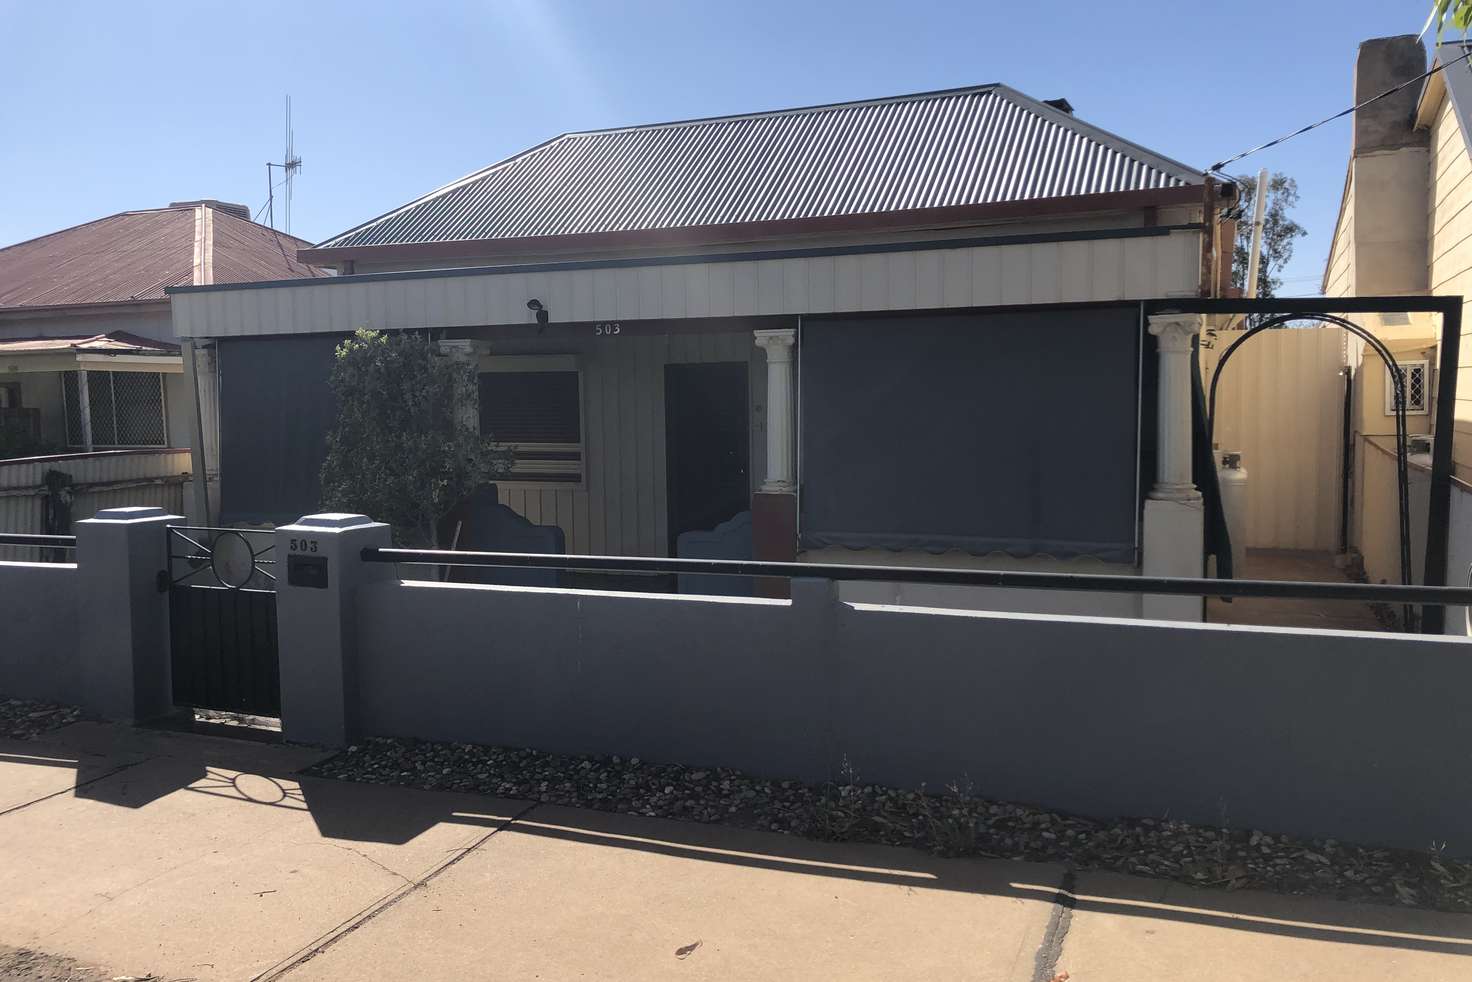 Main view of Homely house listing, 503 Argent St, Broken Hill NSW 2880